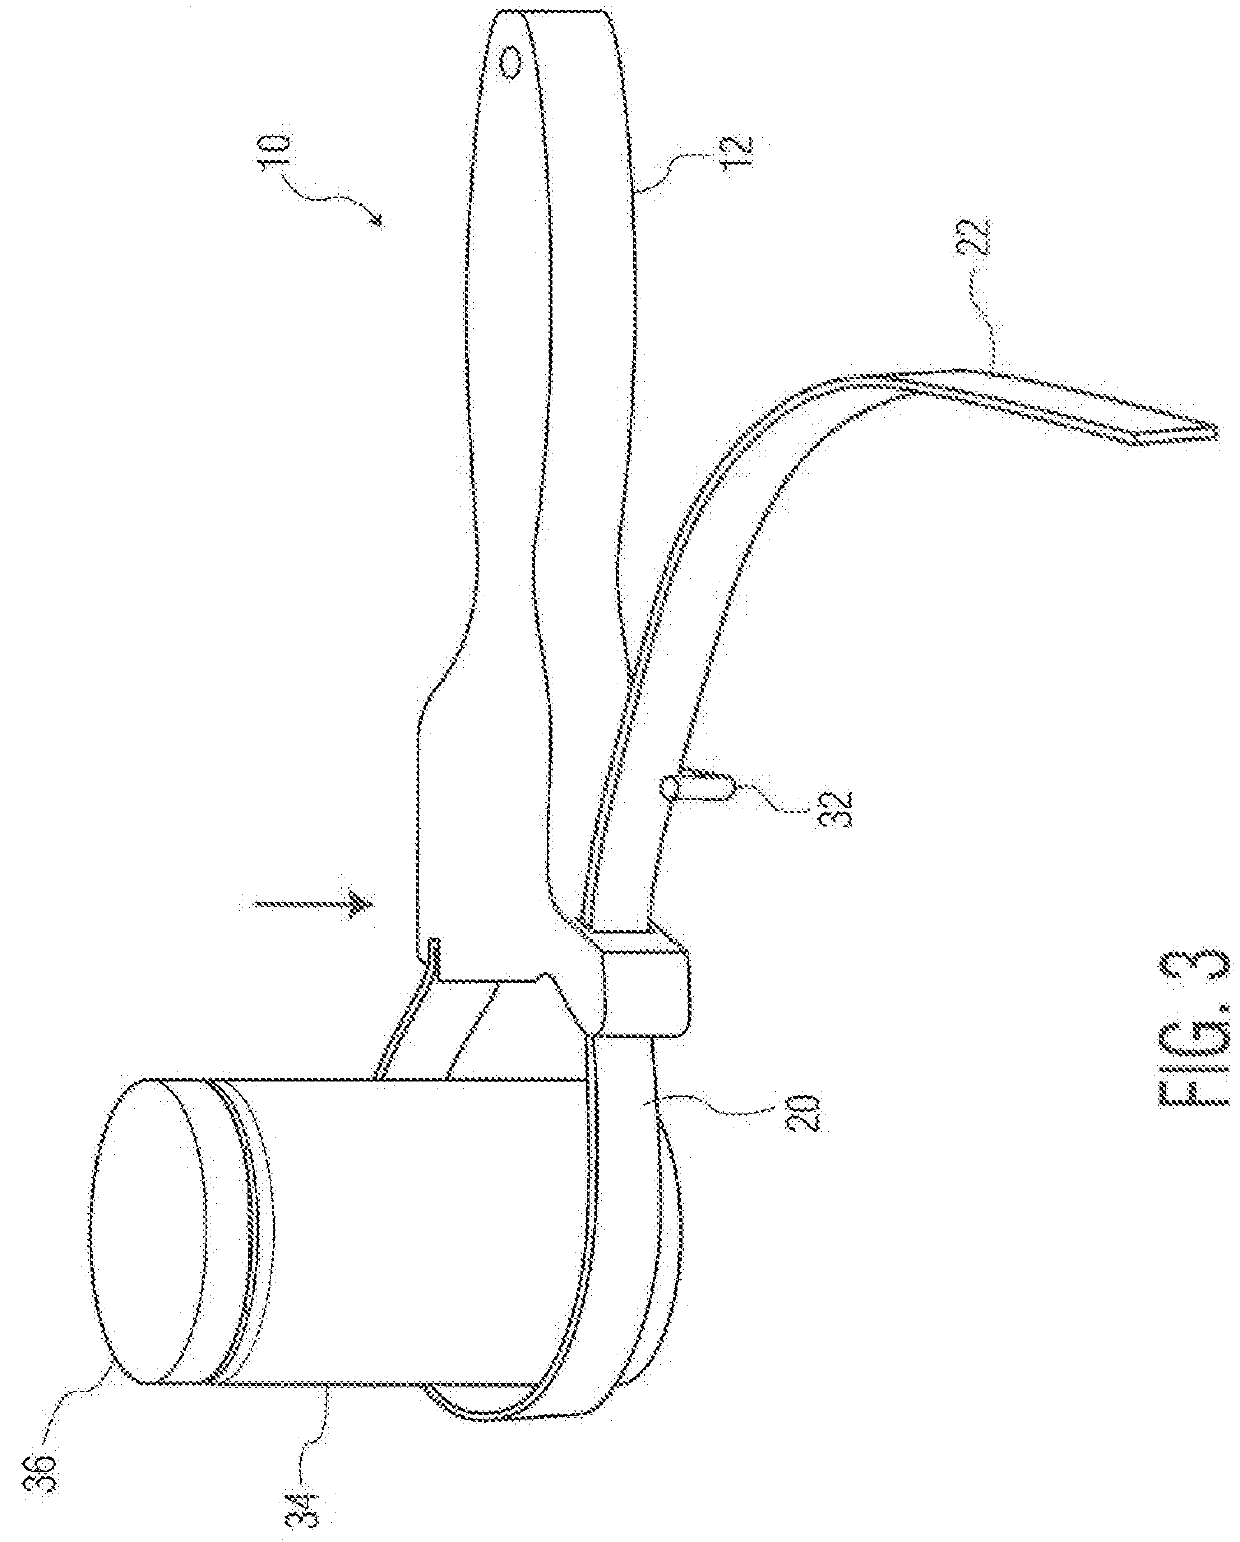 Device and method for firmly gripping an object, such as a container or jar